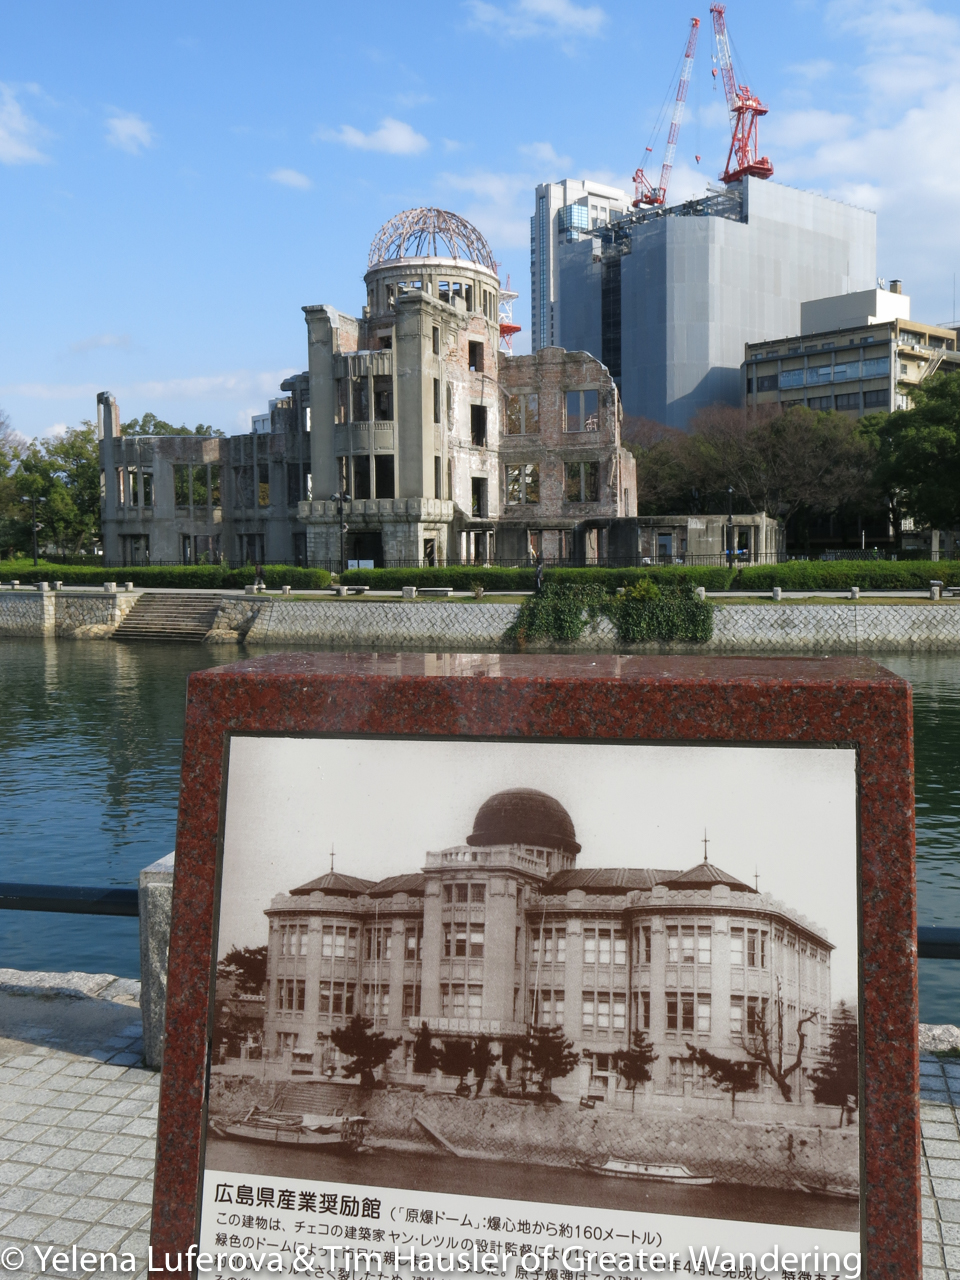 Historical photo of the Hiroshima dome before the nuclear attack